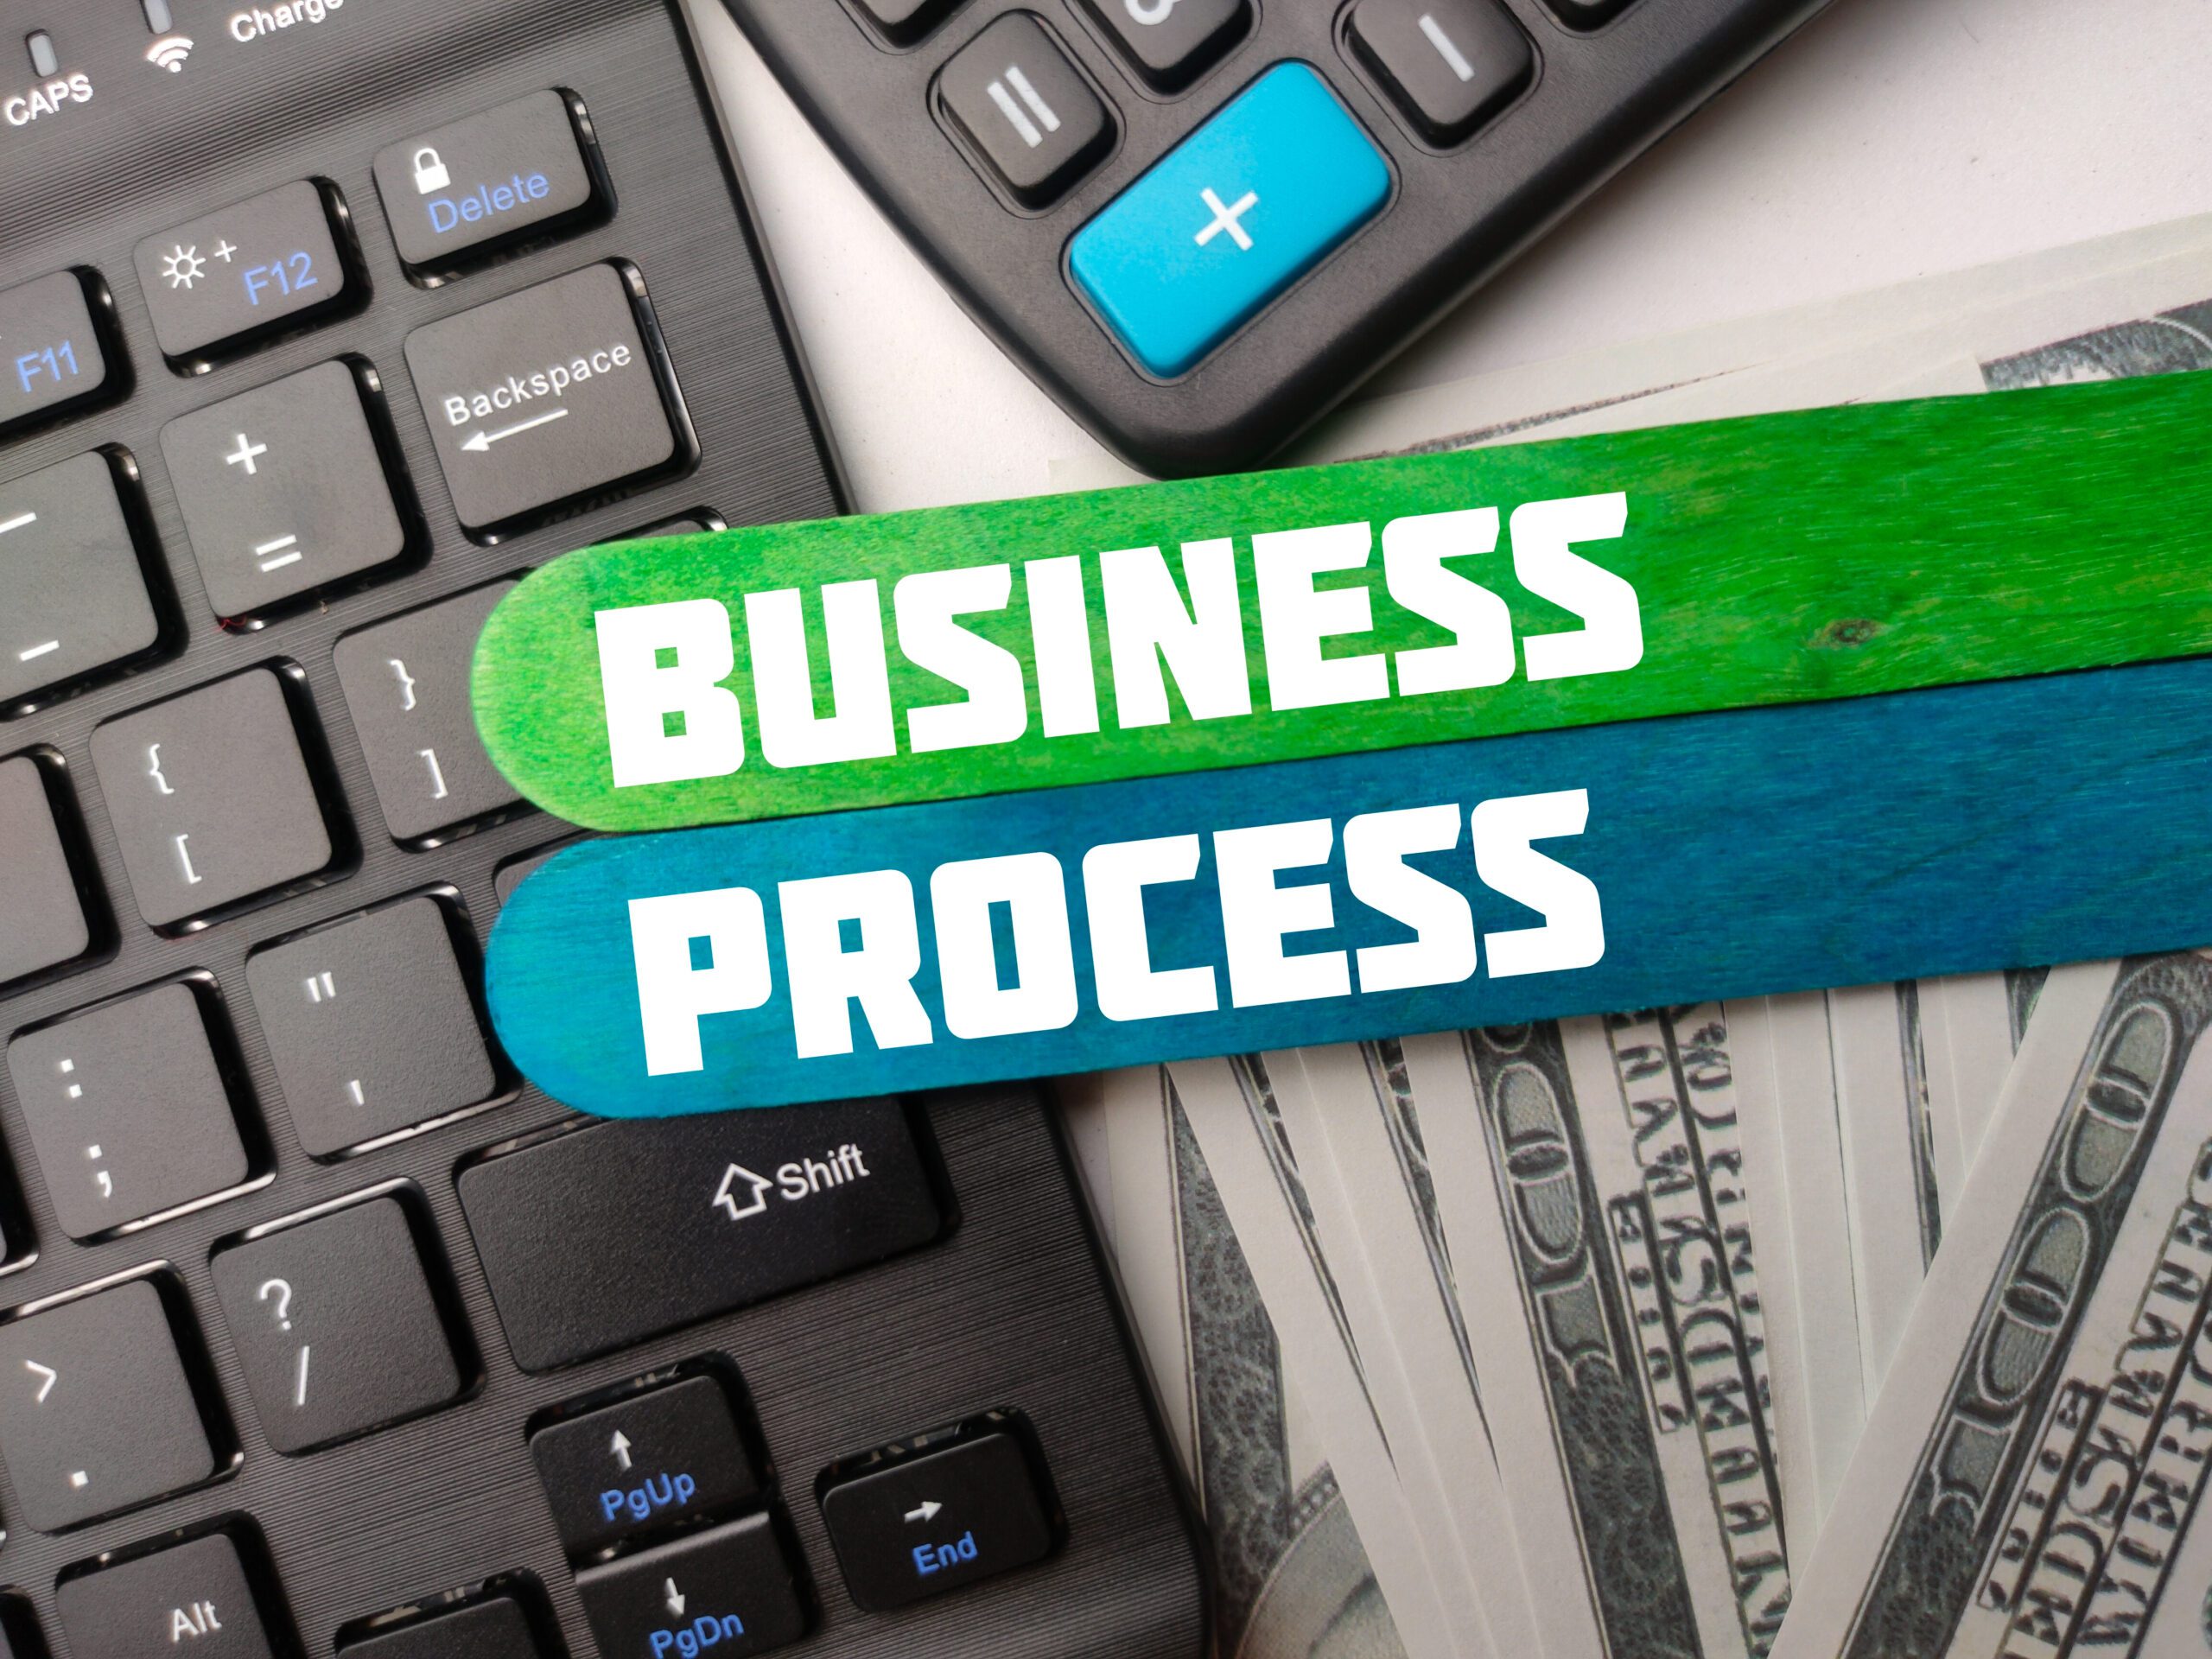 Keyboard,calculator and banknotes with the word BUSINESS PROCESS